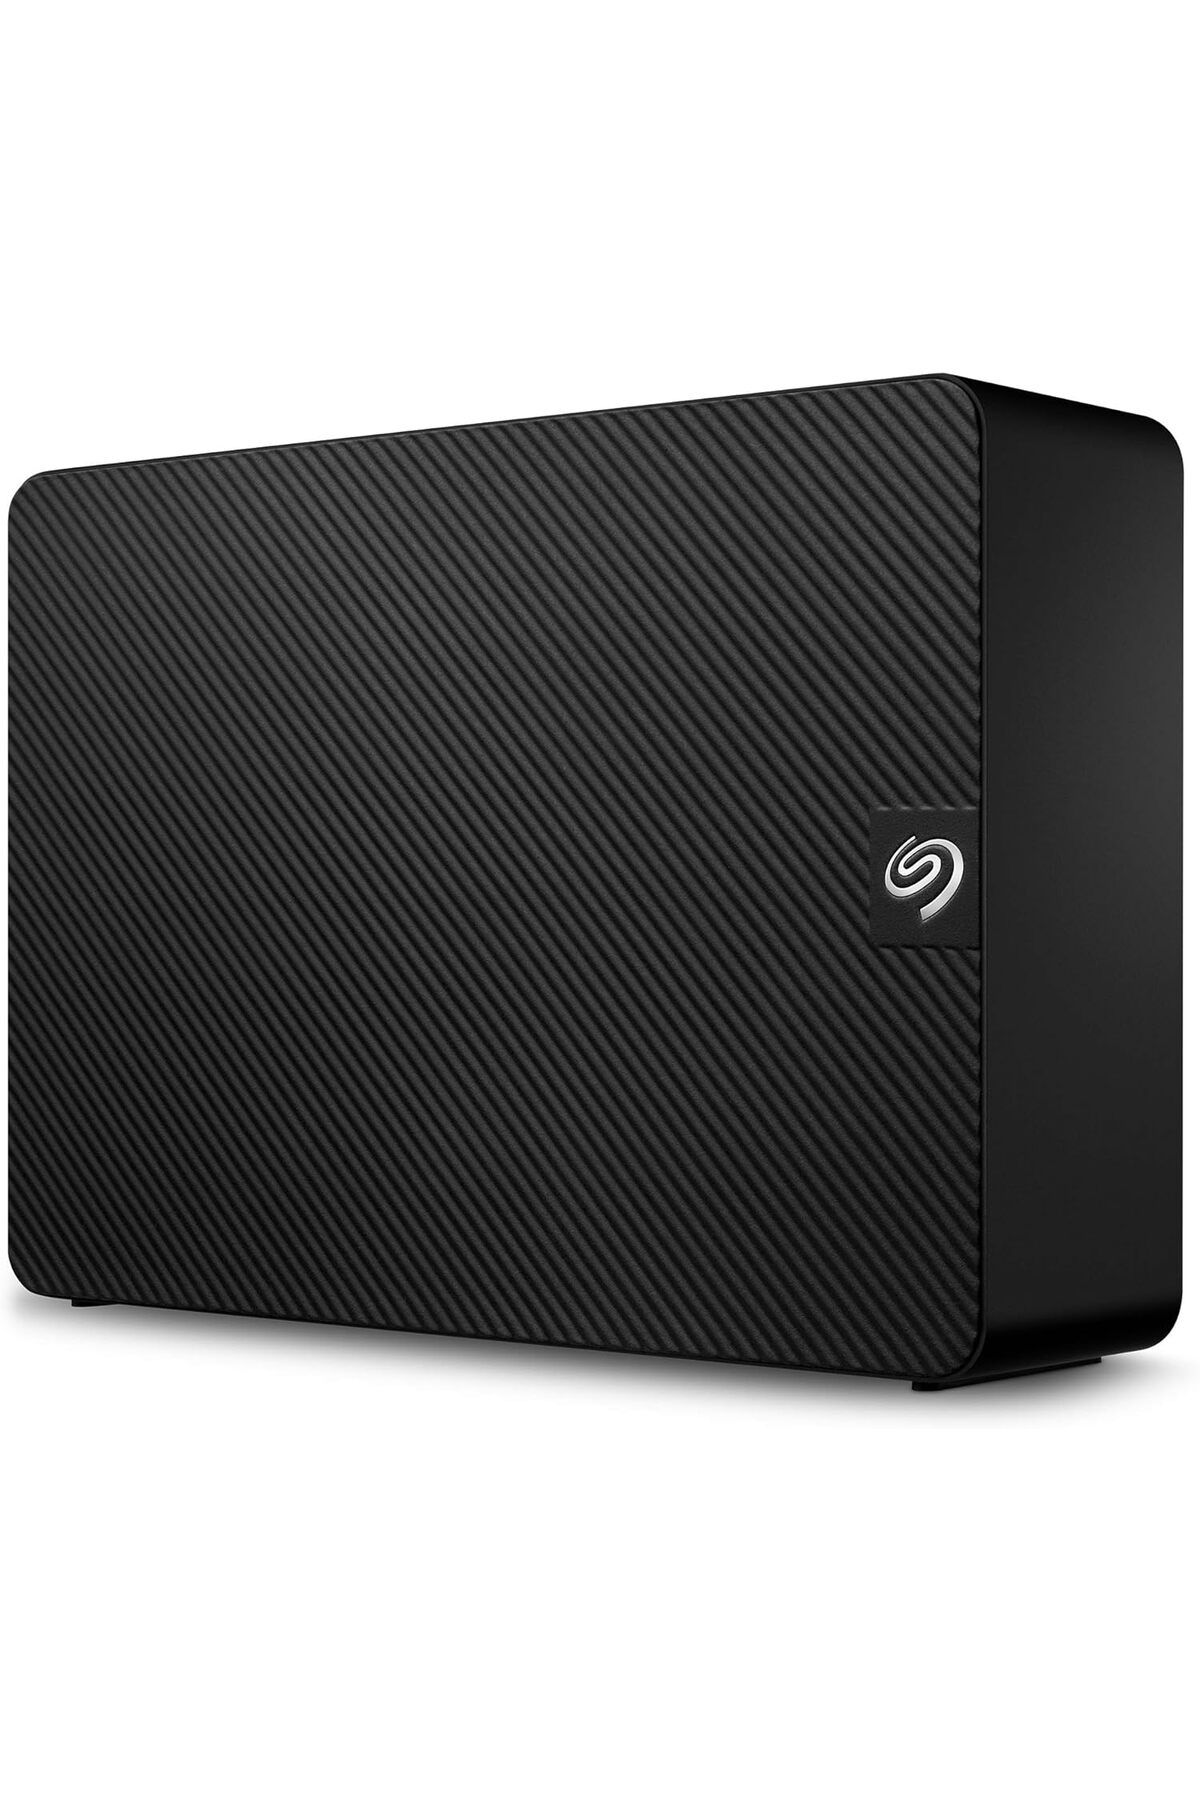 Seagate Expansion 18TB External Hard Drive HDD USB 3.0, Rescue Data Recovery Services STKP18000402